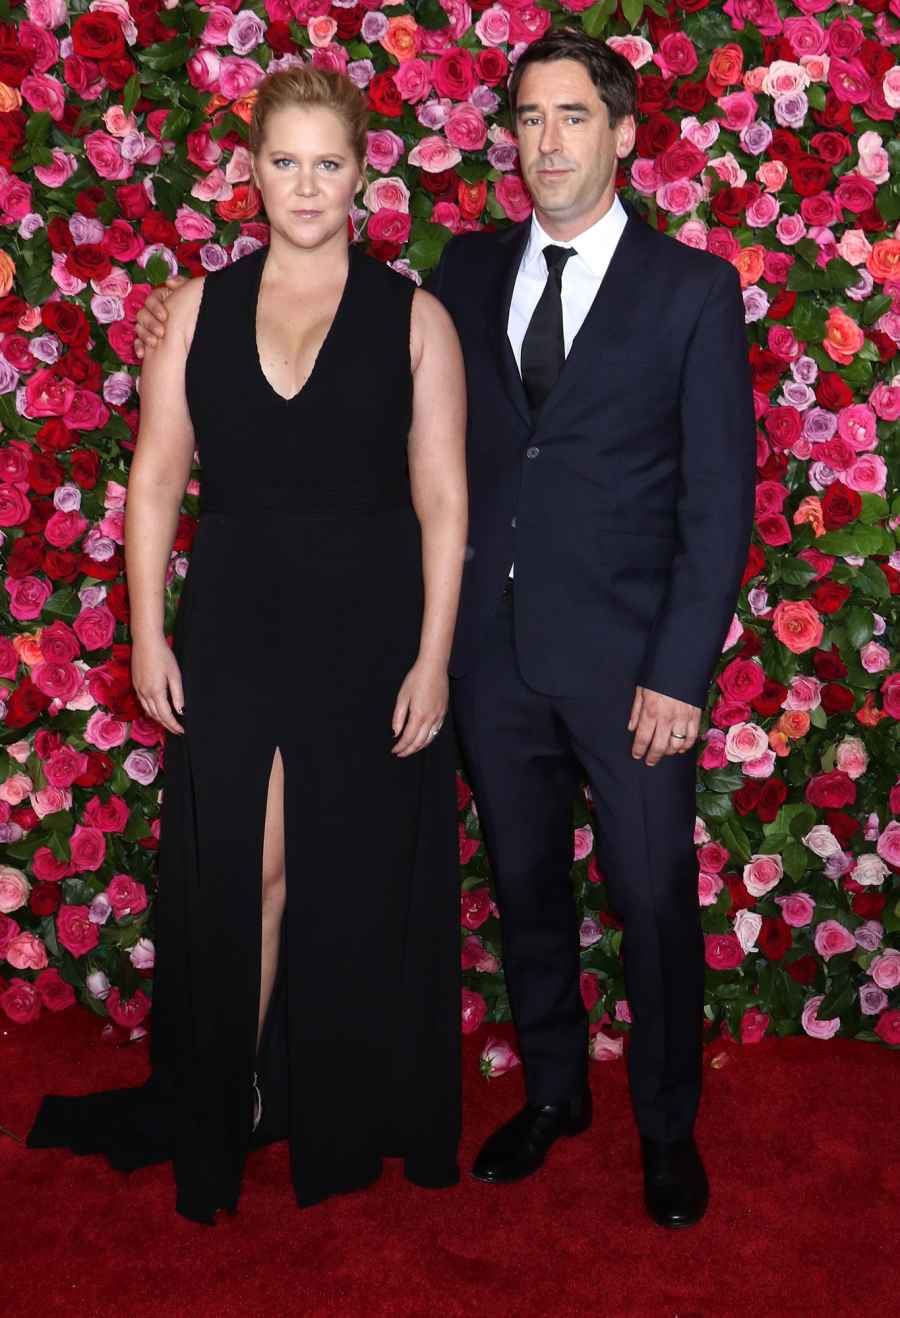 Amy Schumer and Chris Fischer Most Googled Red Carpet Looks of 2019